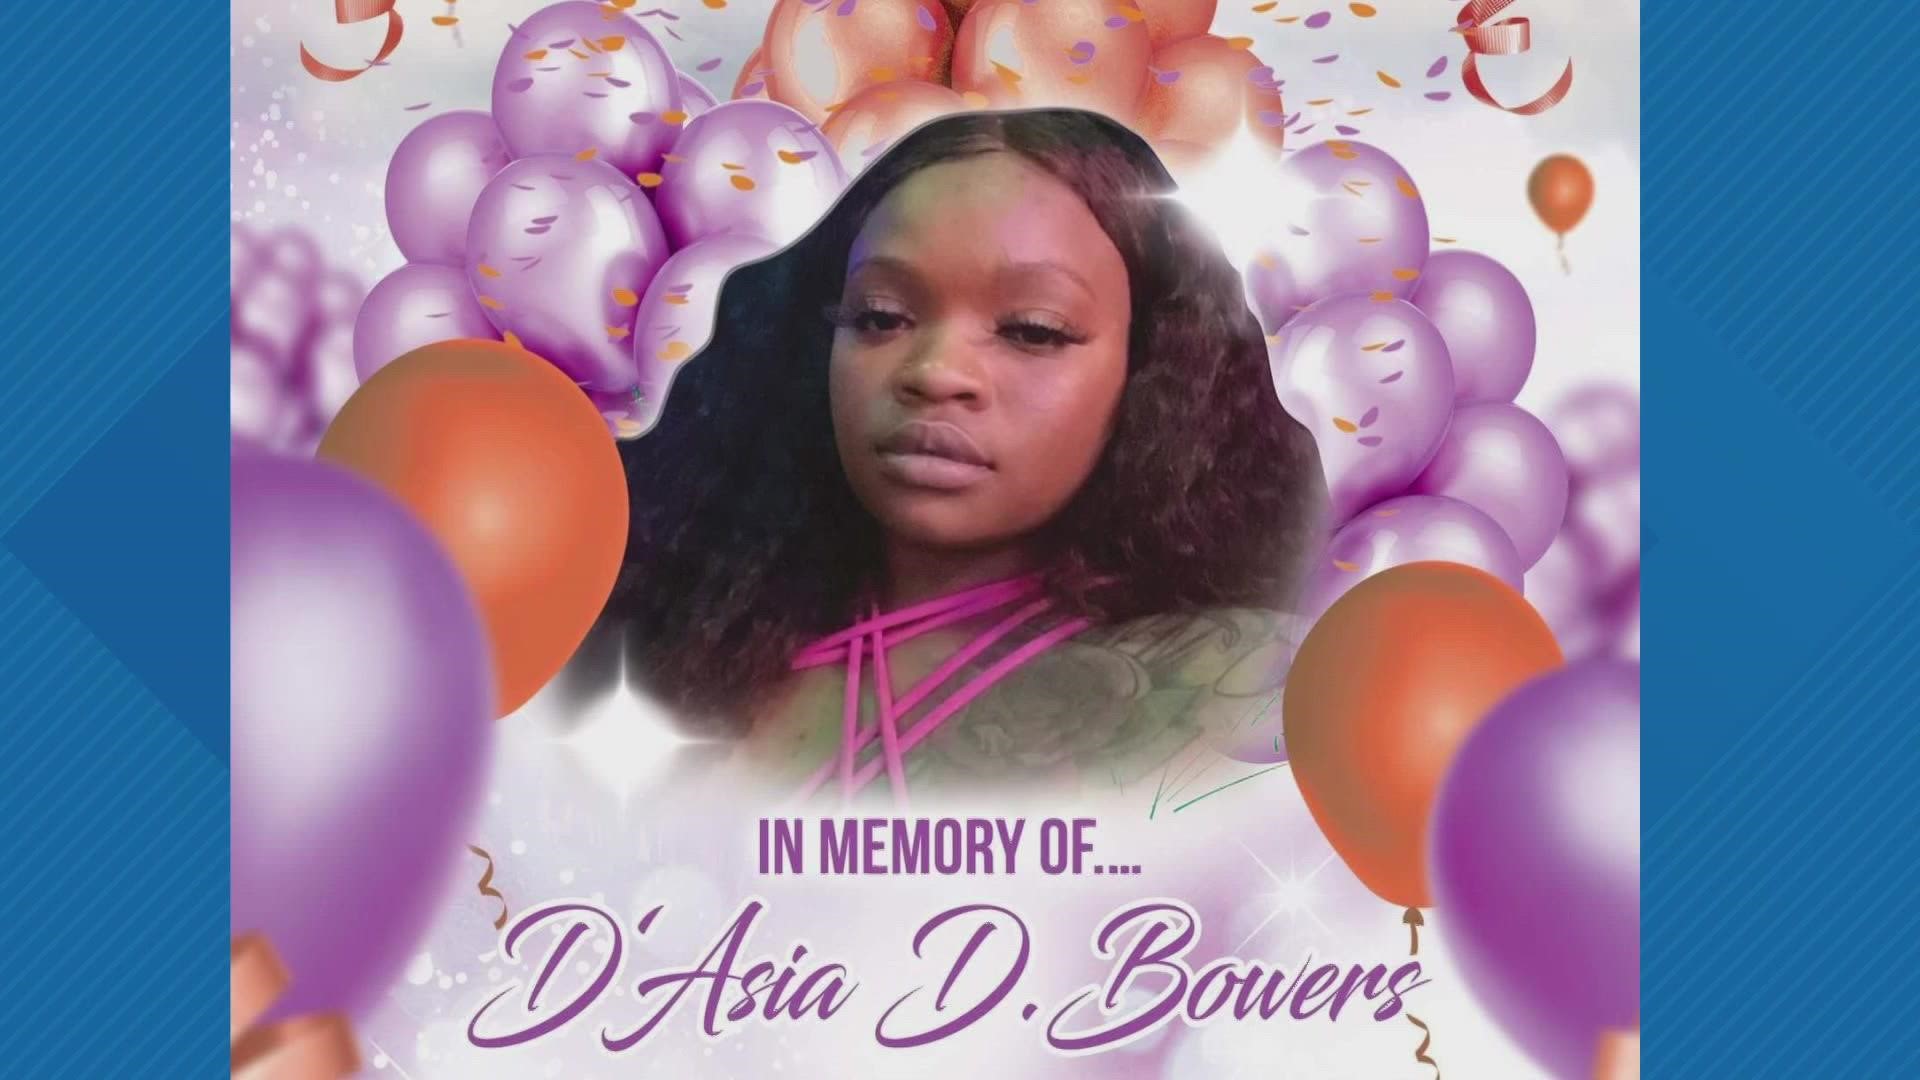 25-year-old D’Asia Bowers was killed around 1:15 a.m. Monday morning while driving near Broadway and Warren. Police are still tracking down the gunman.